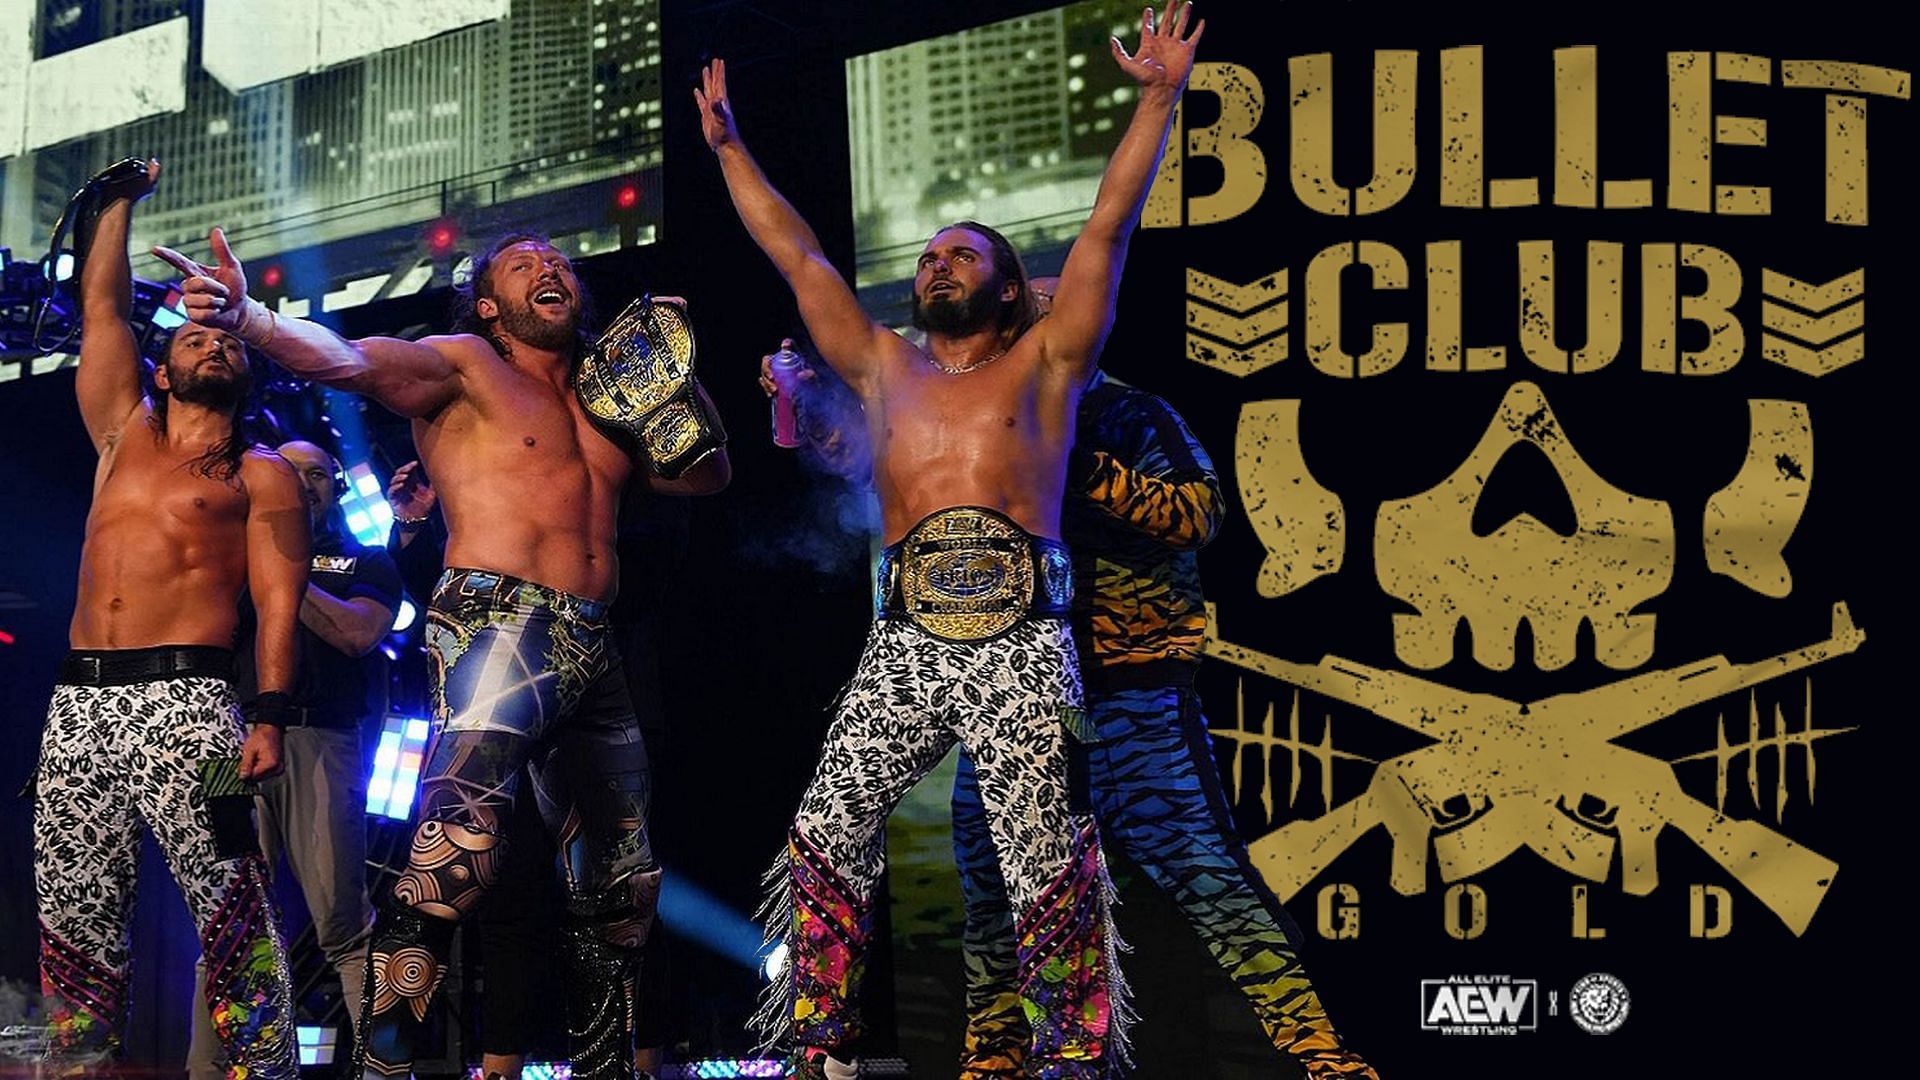 The Elite and Bullet Club Gold are top factions in AEW